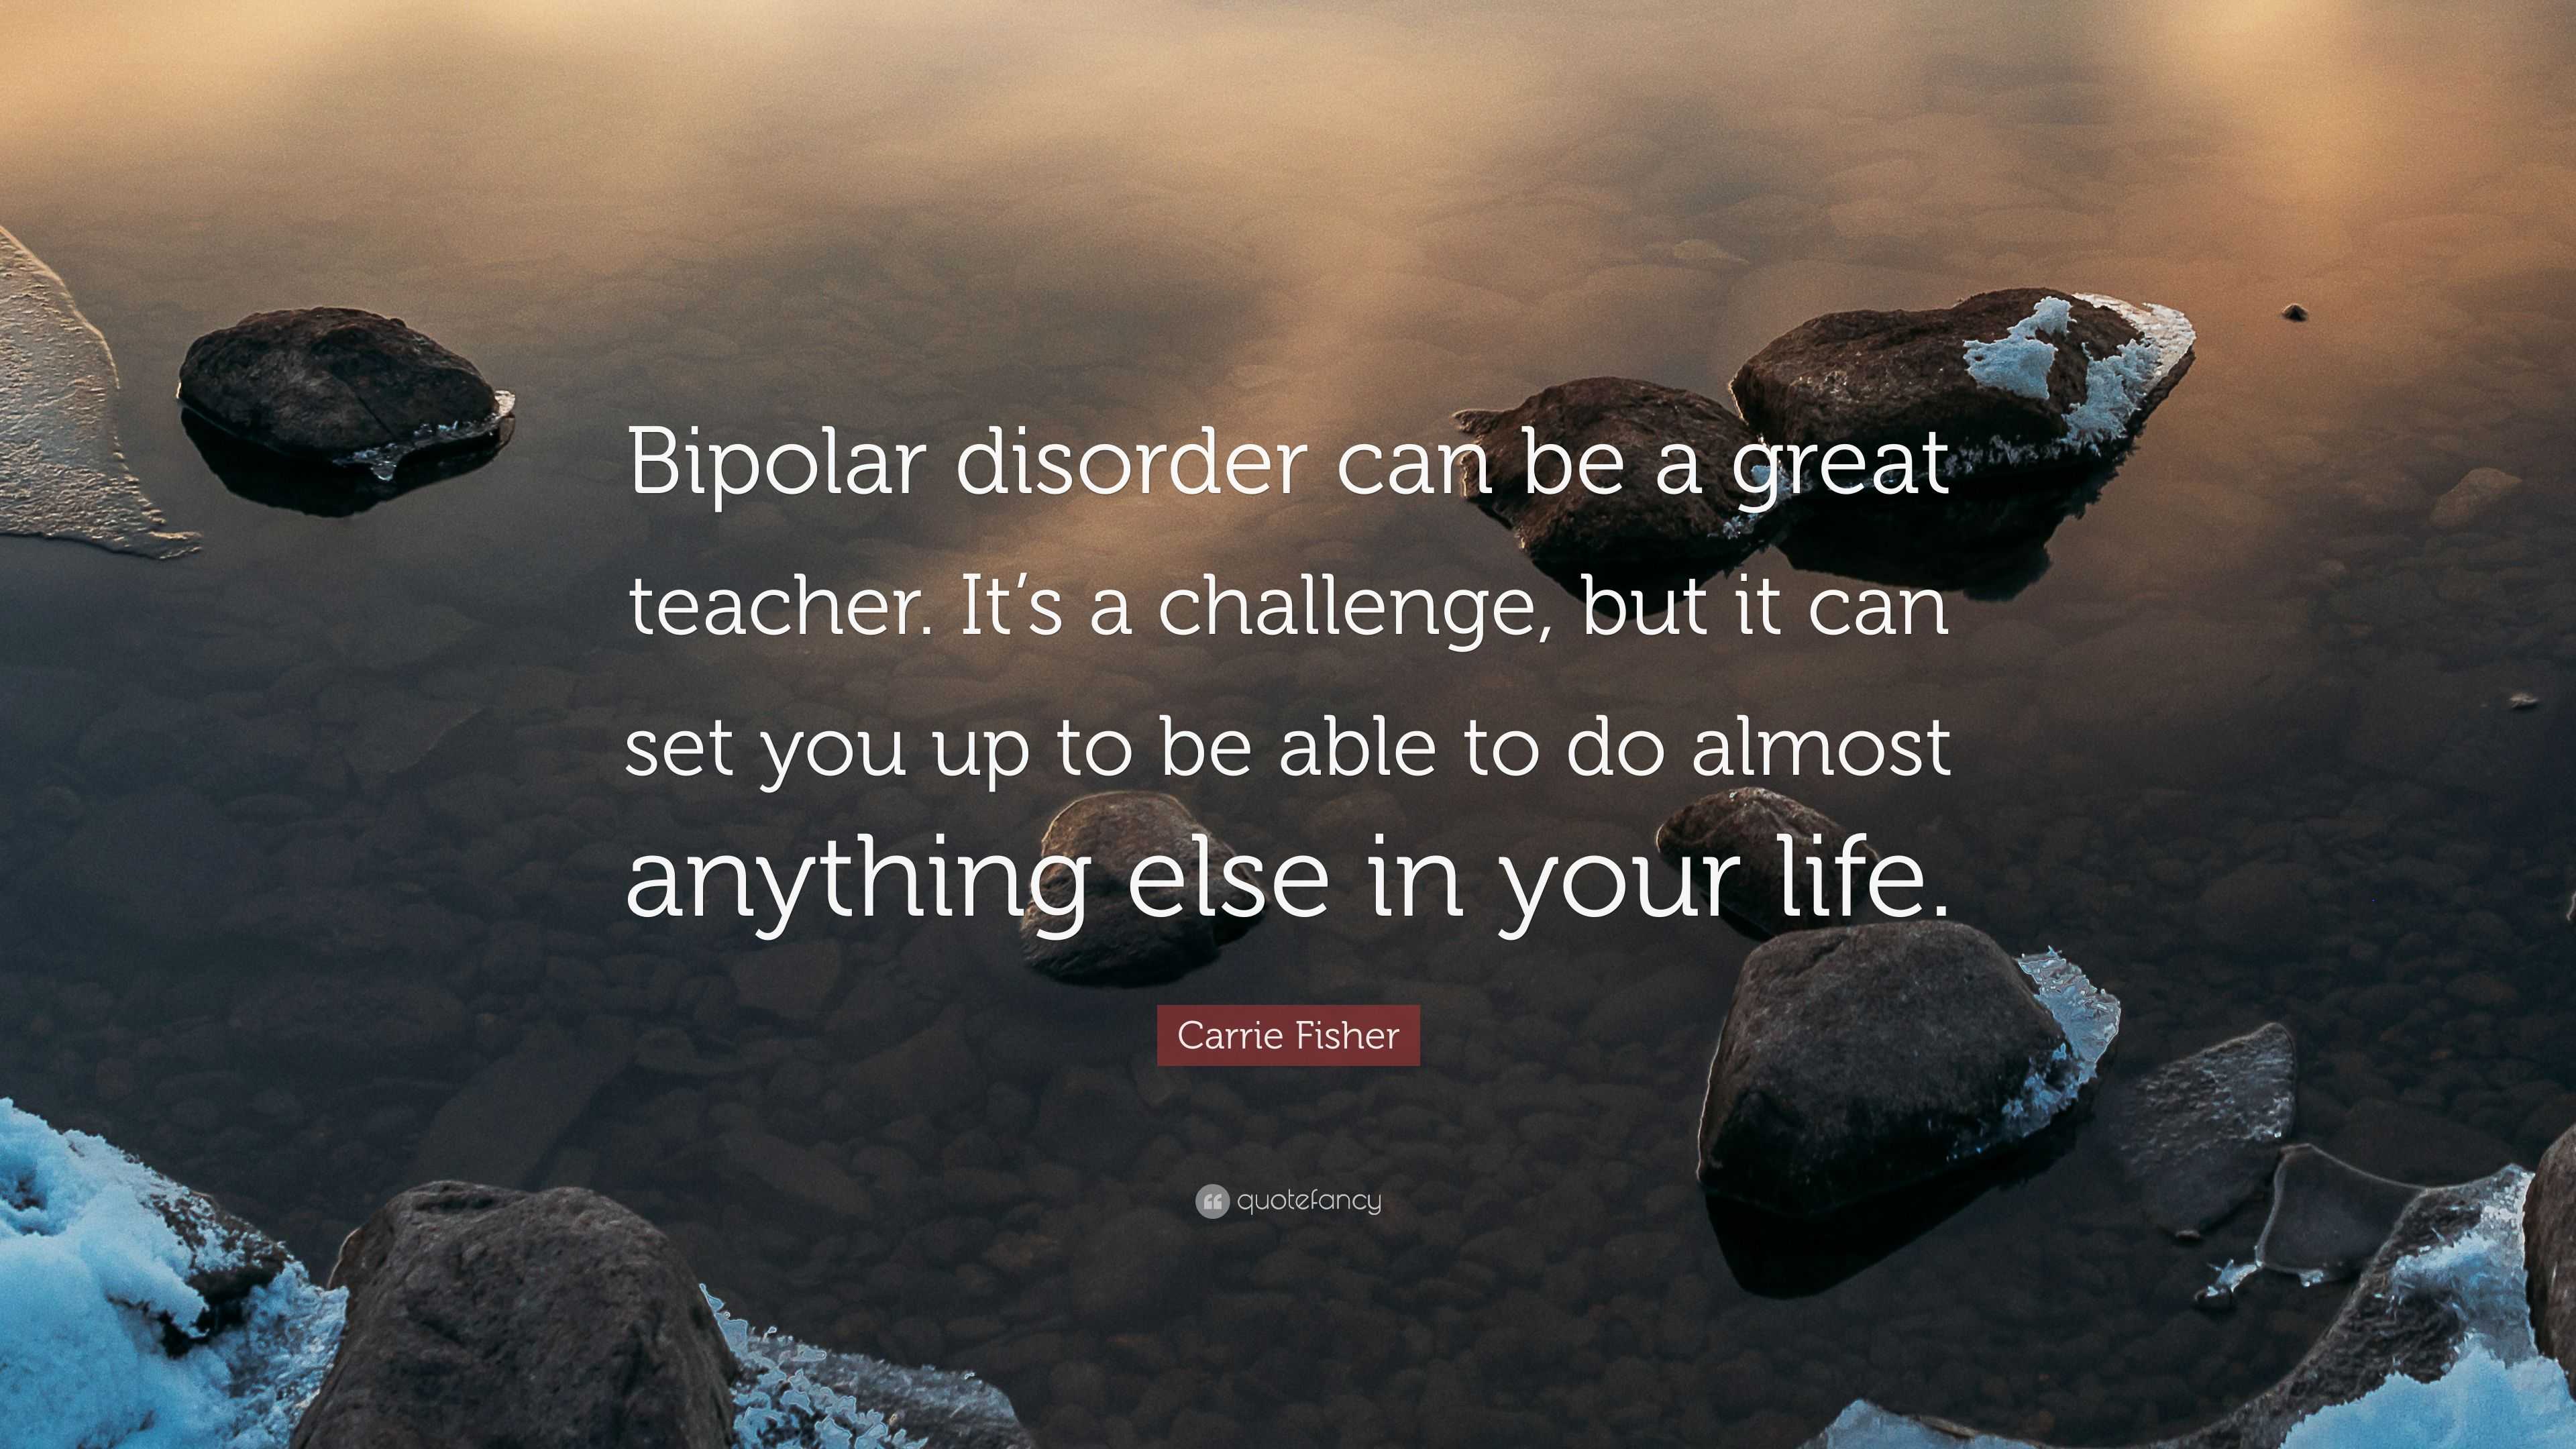 Carrie Fisher Quote: “Bipolar disorder can be a great teacher. It’s a